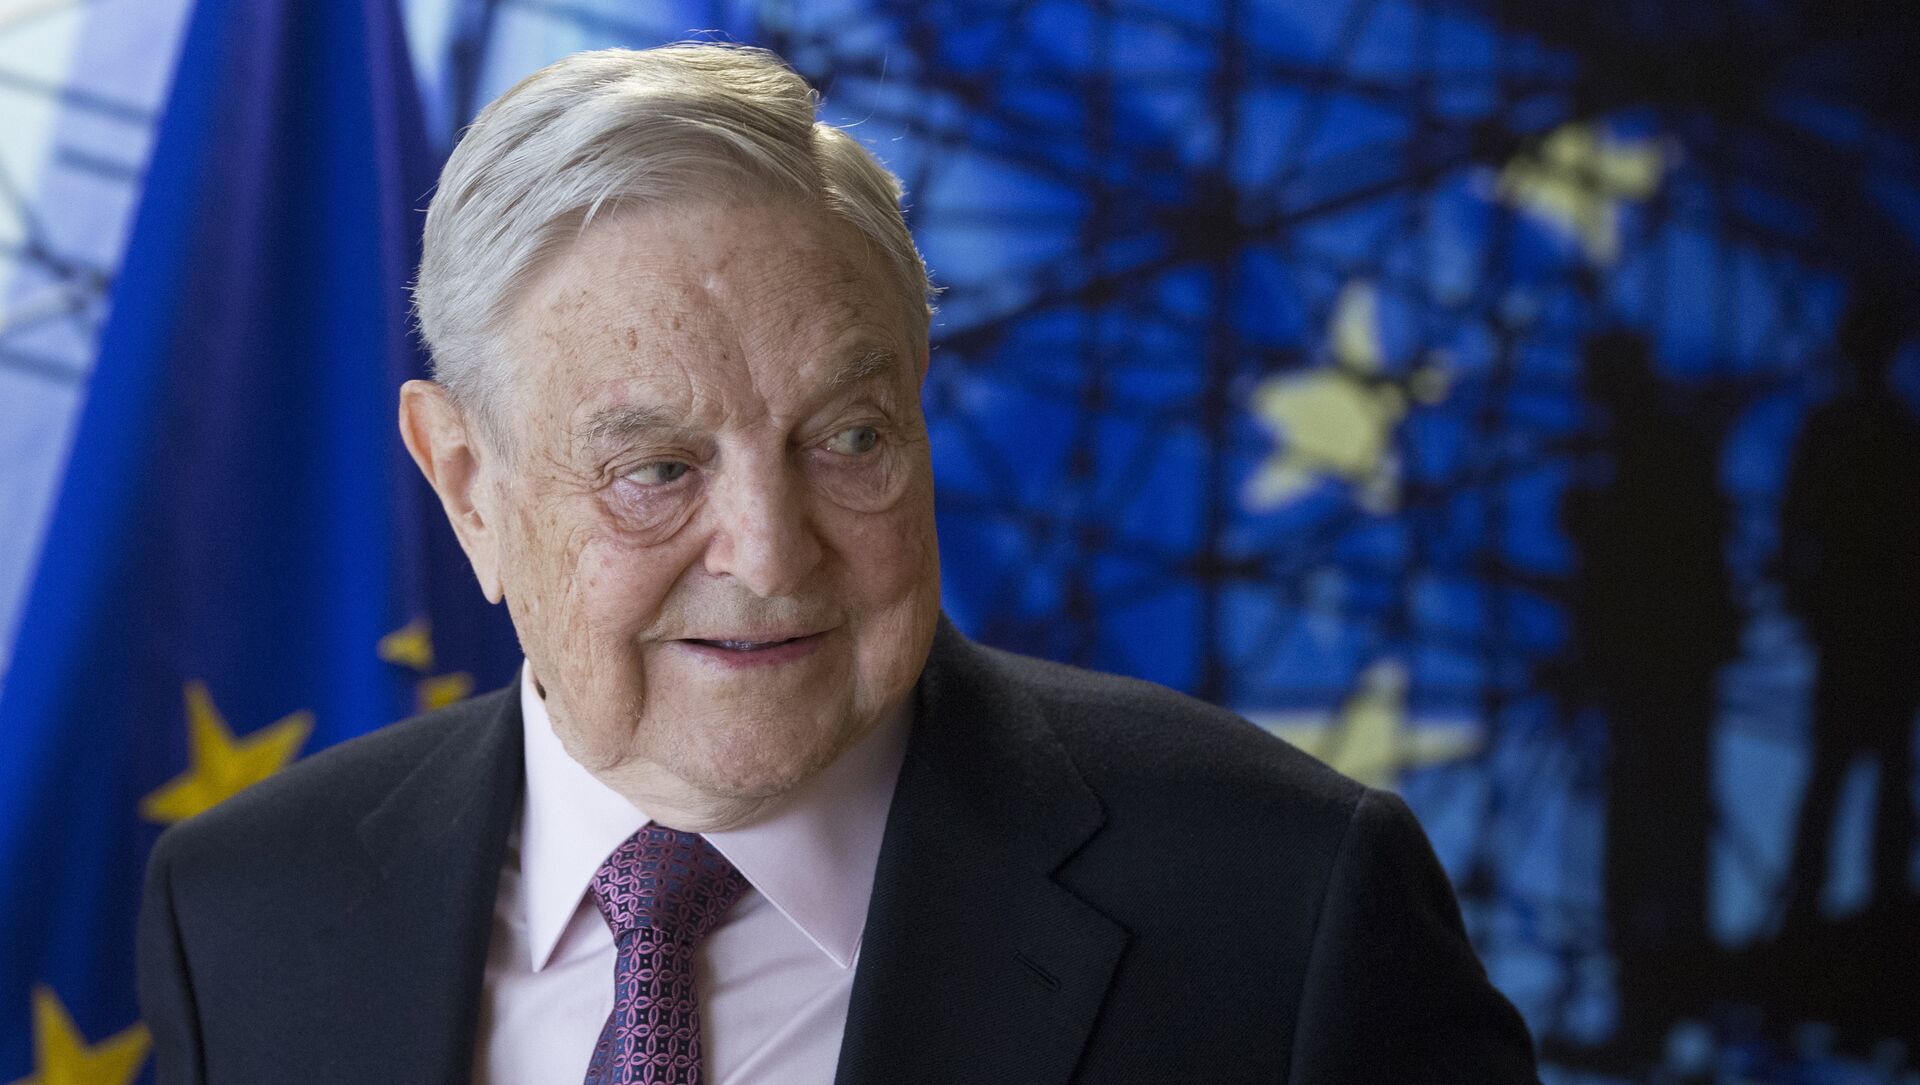 George Soros, Founder and Chairman of the Open Society Foundation, waits for the start of a meeting at EU headquarters in Brussels on Thursday, April 27, 2017 - Sputnik Moldova-România, 1920, 27.02.2021